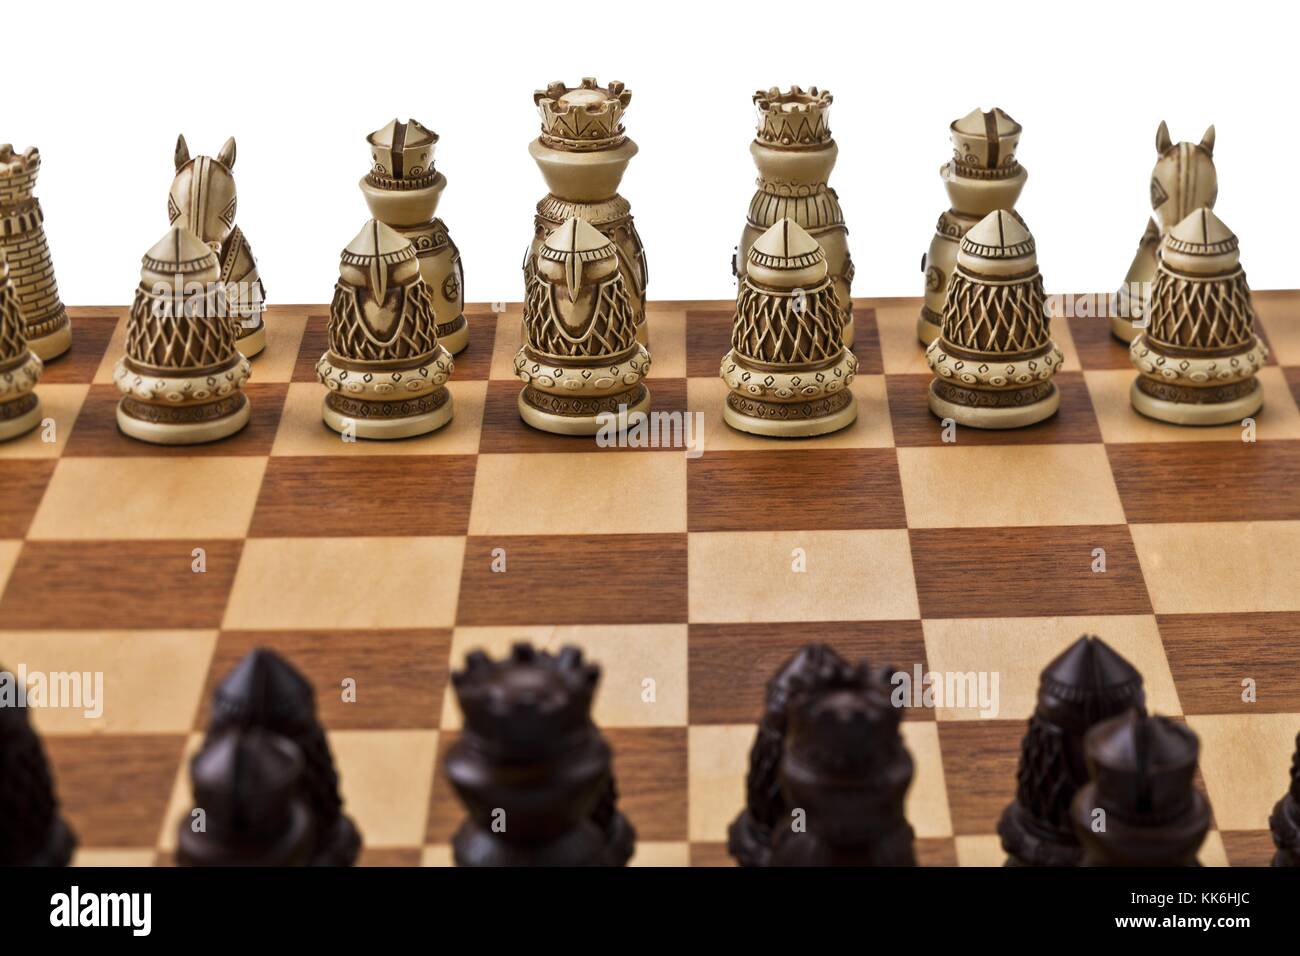 vintage wooden chess board Stock Photo